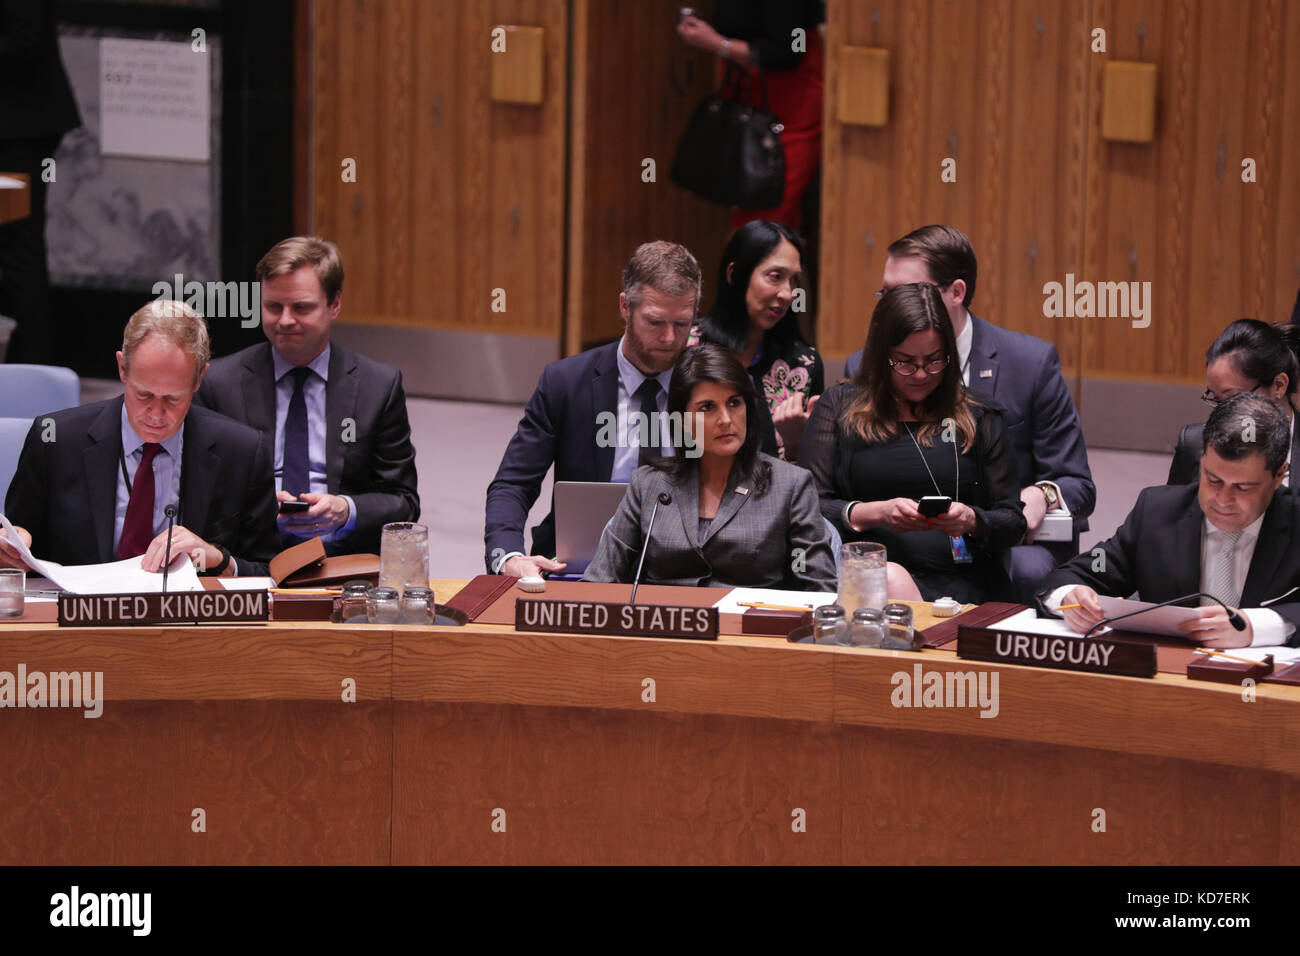 New York, NY, USA. 10th October,  2017. United Nations, New York, USA British UN Ambassador Matthew Rycroft and Nikki R. Haley, United States Permanent Representative to the UN During a Security Council meeting on Yemen today at the UN Headquarters in New York.Photo: Luiz Rampelotto/EuropaNewswire Credit: Luiz Rampelotto/ZUMA Wire/Alamy Live News Stock Photo